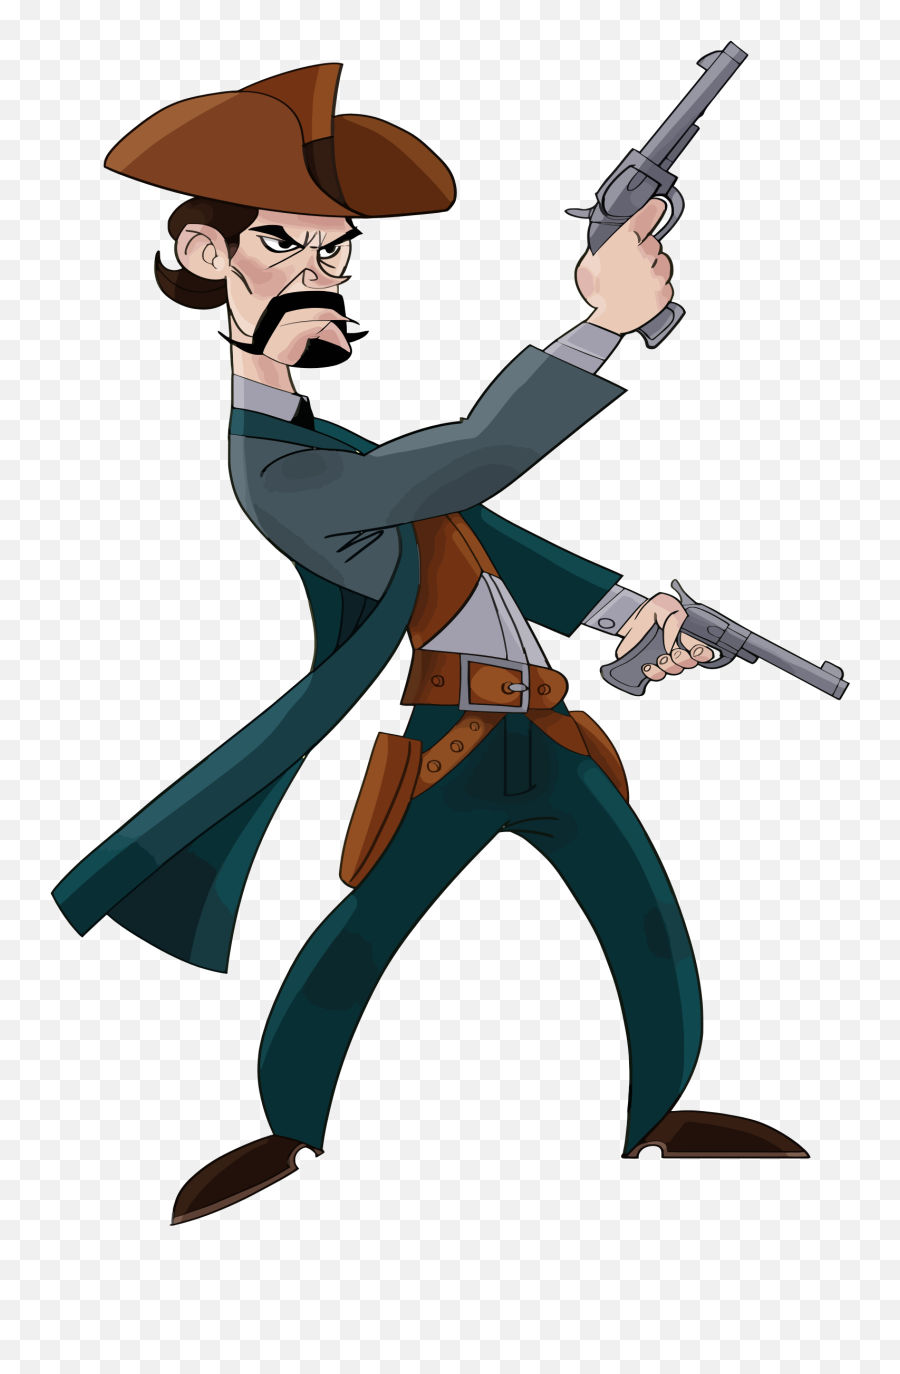 Download Cowboy Png Image For Free - Wild West Cowboy Cartoon,Cowboy Png